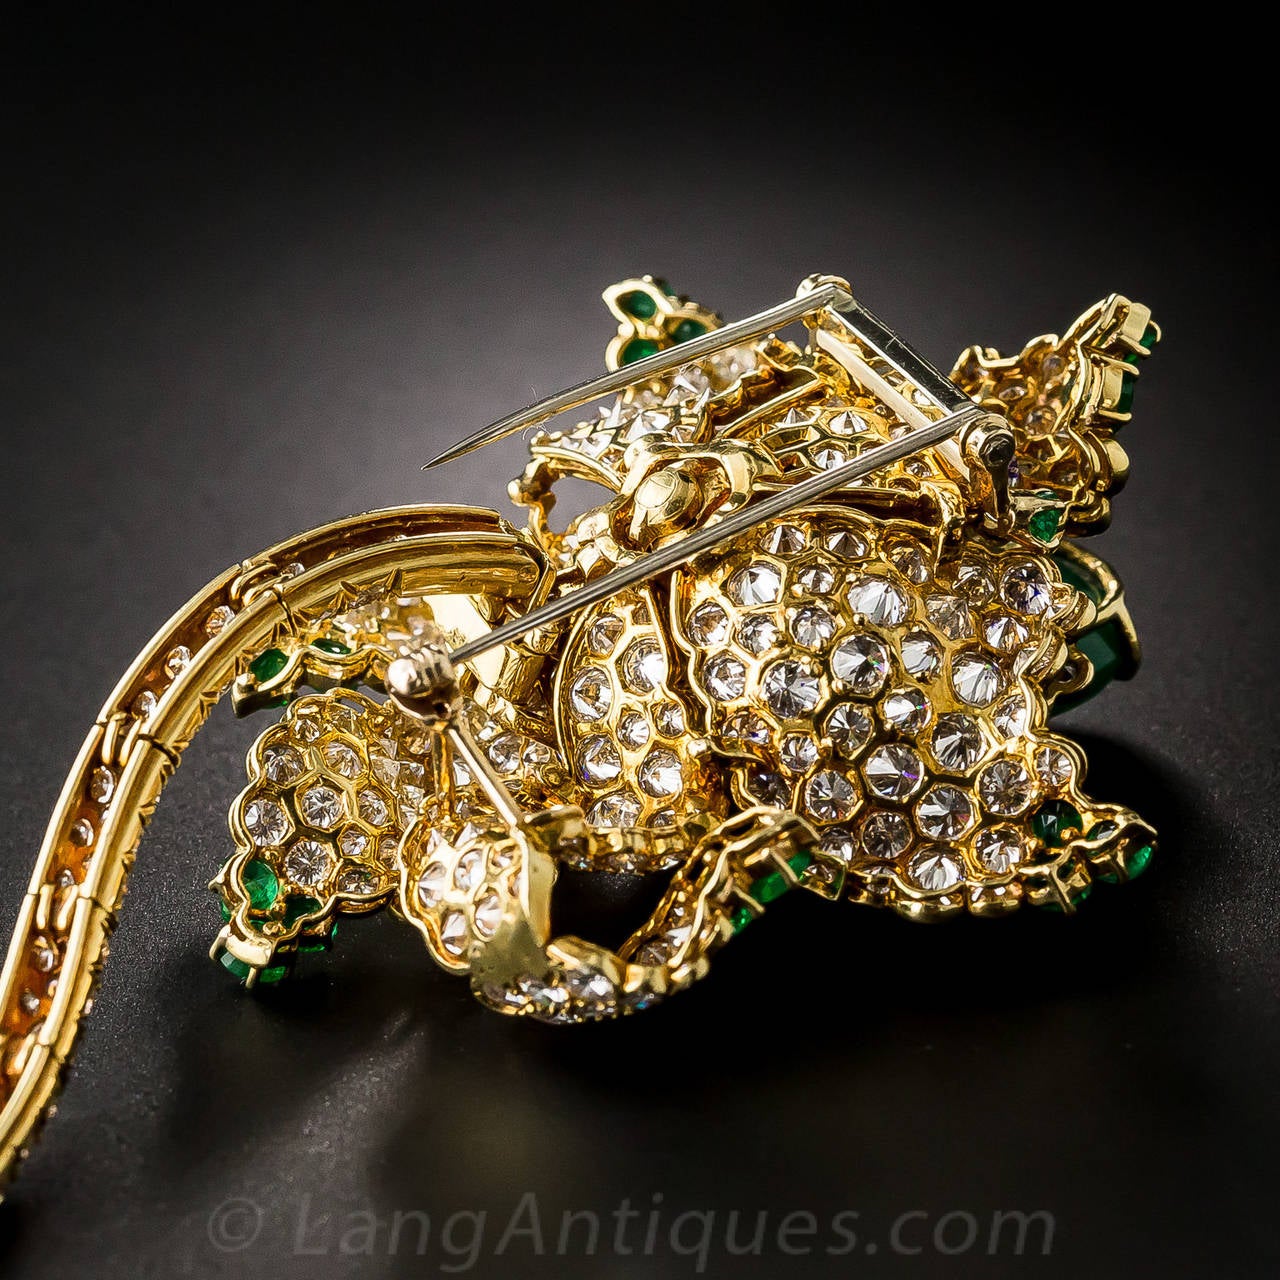 Spectacular 12 Carat Cabochon Emerald Diamond Gold Flower Brooch For Sale 6